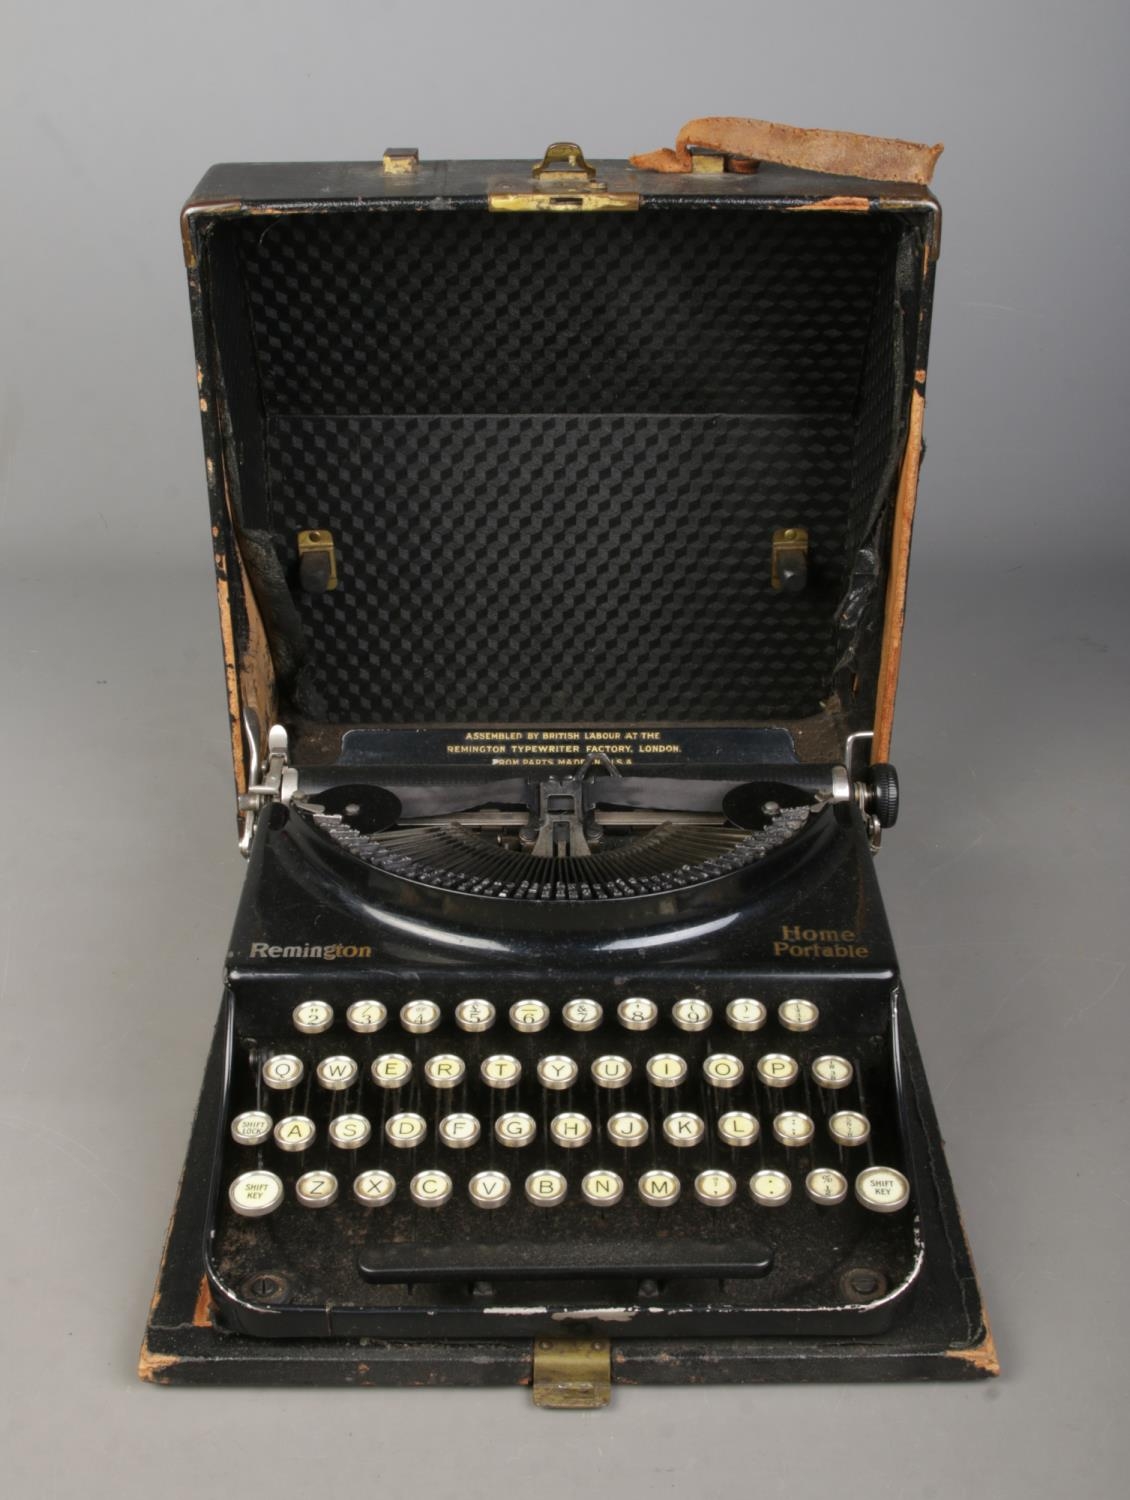 A Remington Home Portable Typewriter. Has inscription of ' Assembled by British Labour at the